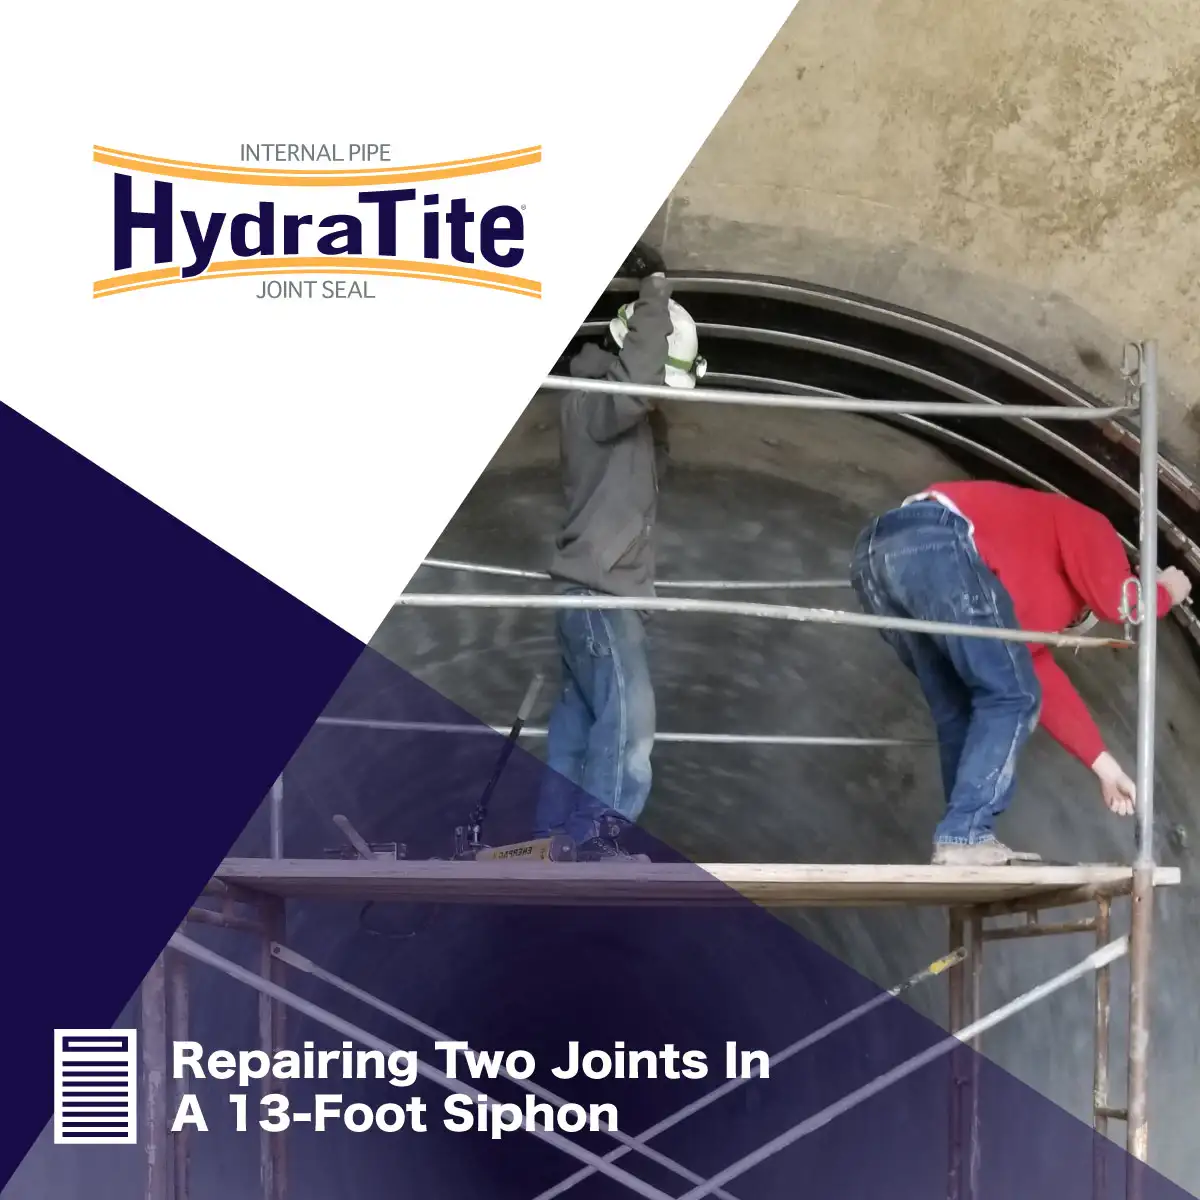 Two technicians on scaffolding installing a large HydraTite seal, 'Repairing Four Joints In 13-Foot Siphons'